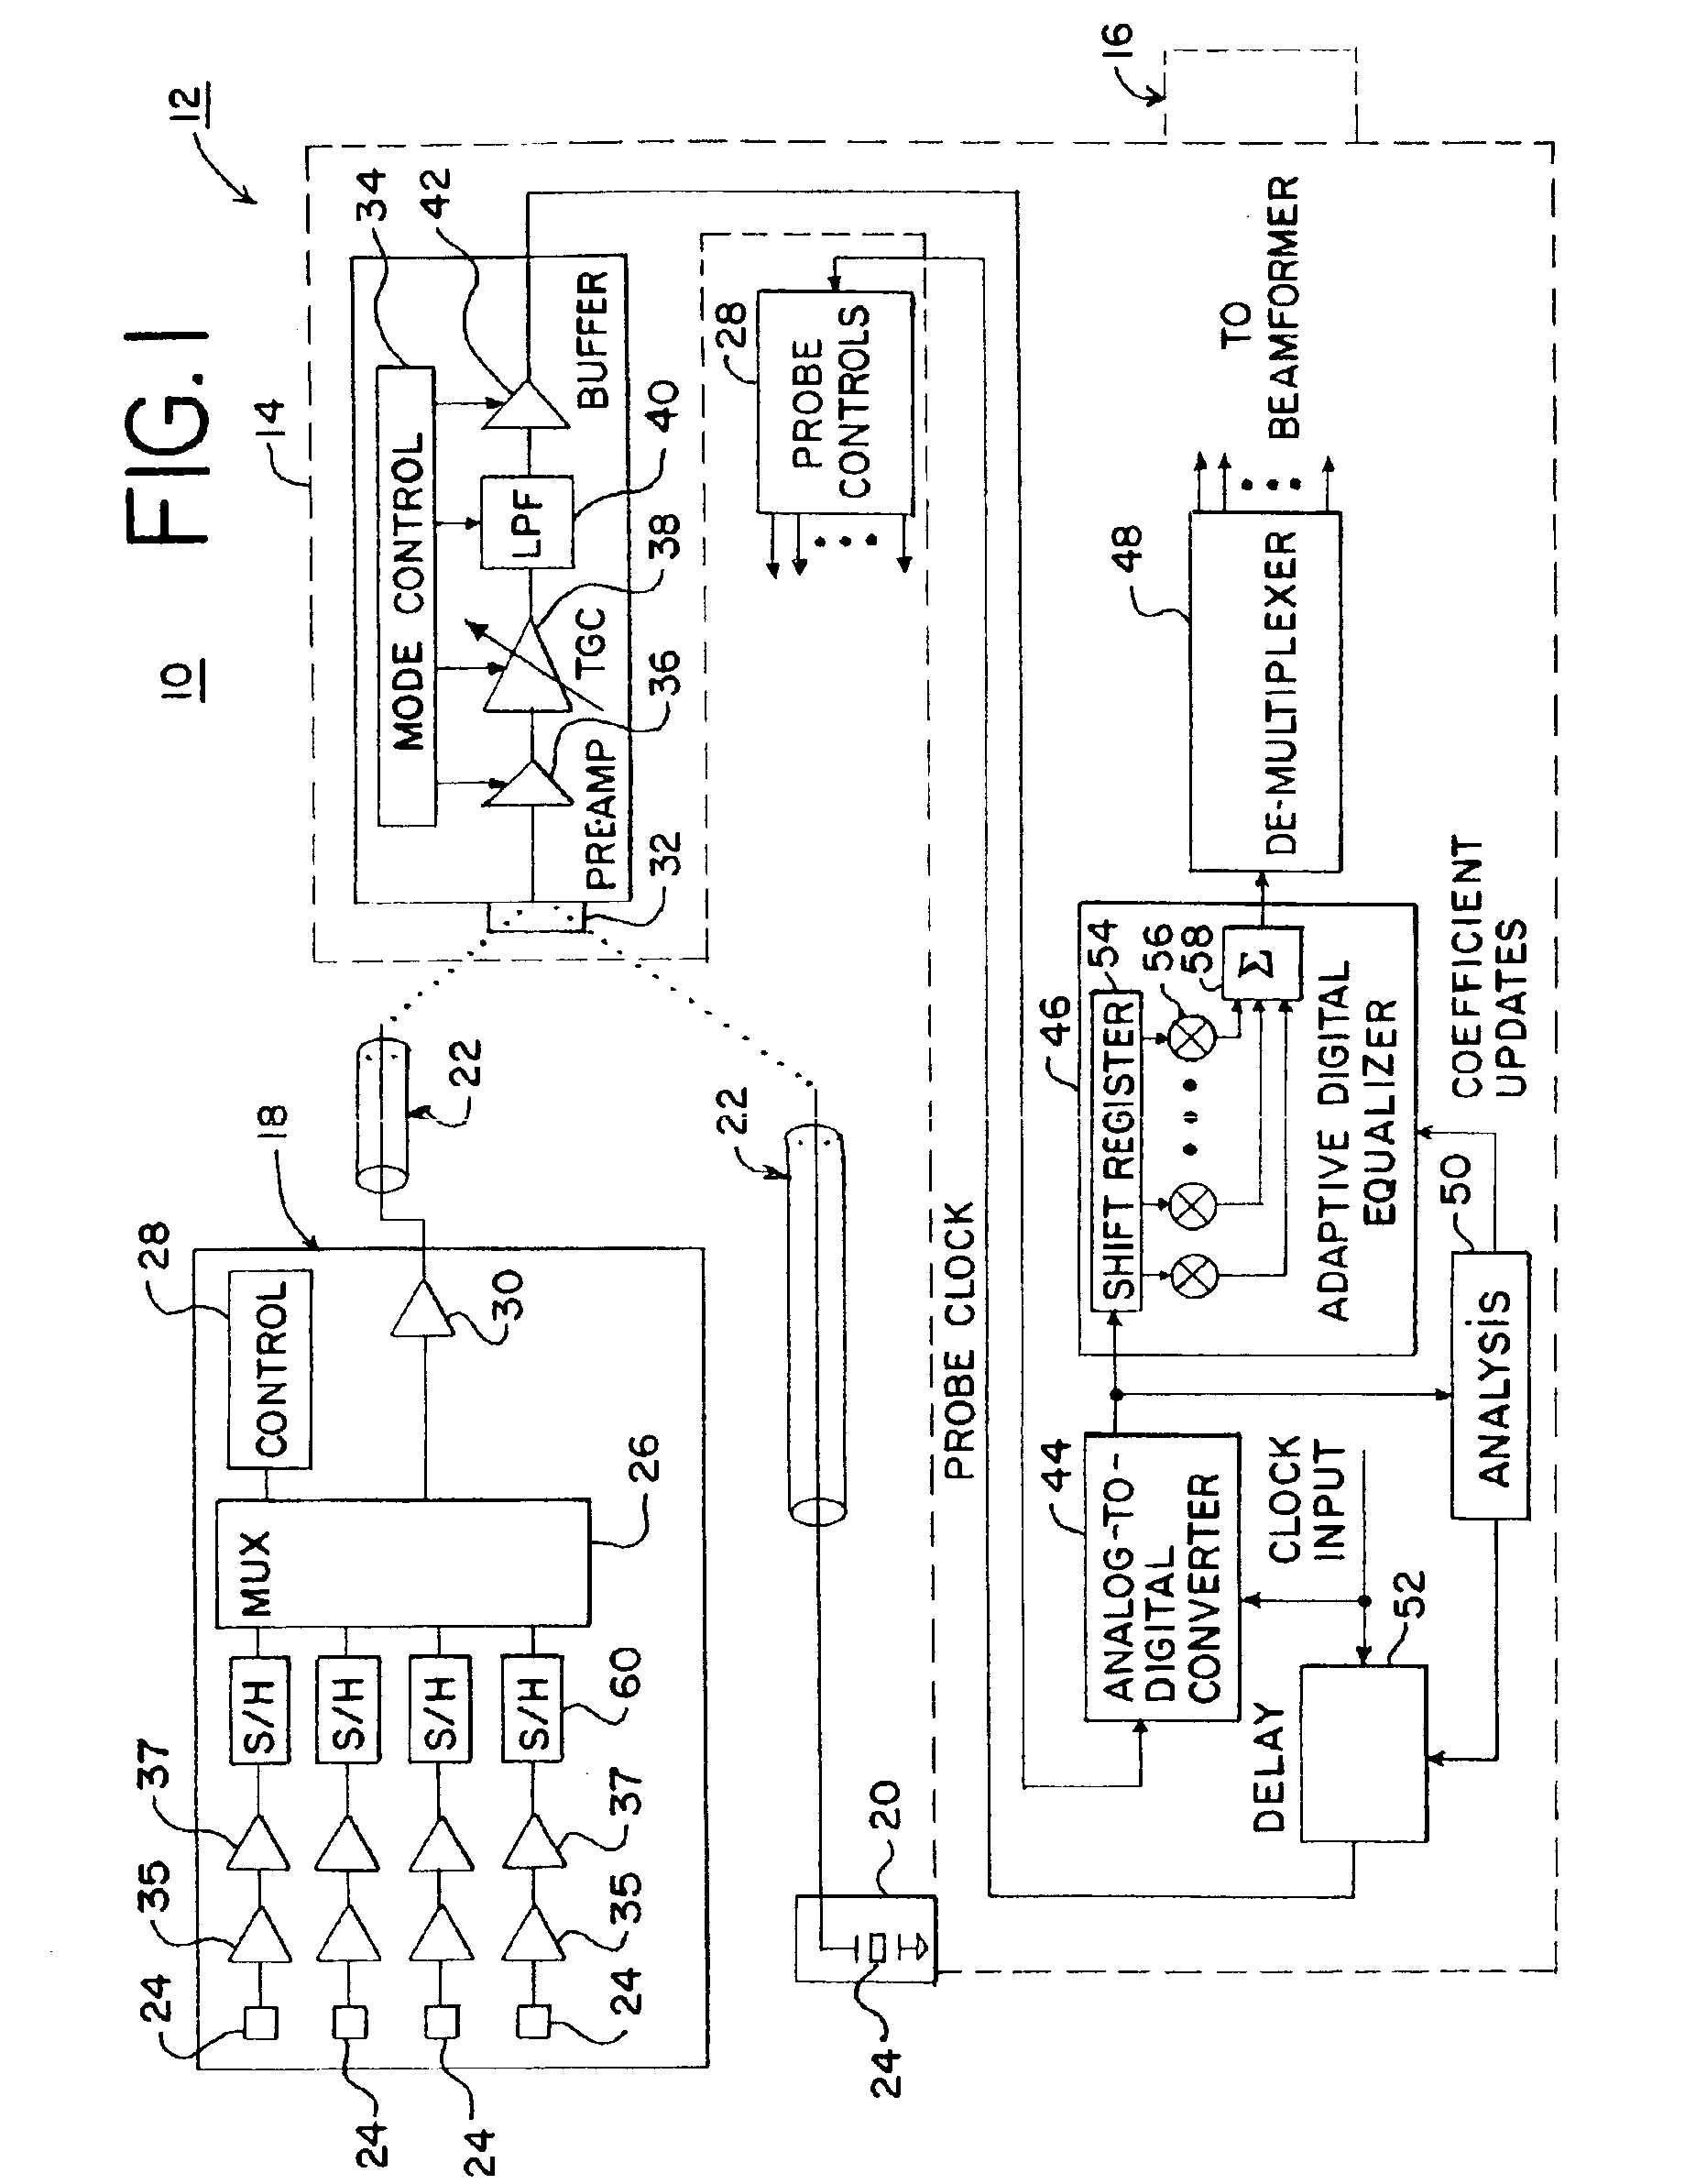 Multi-dimensional transducer arrays and method of manufacture